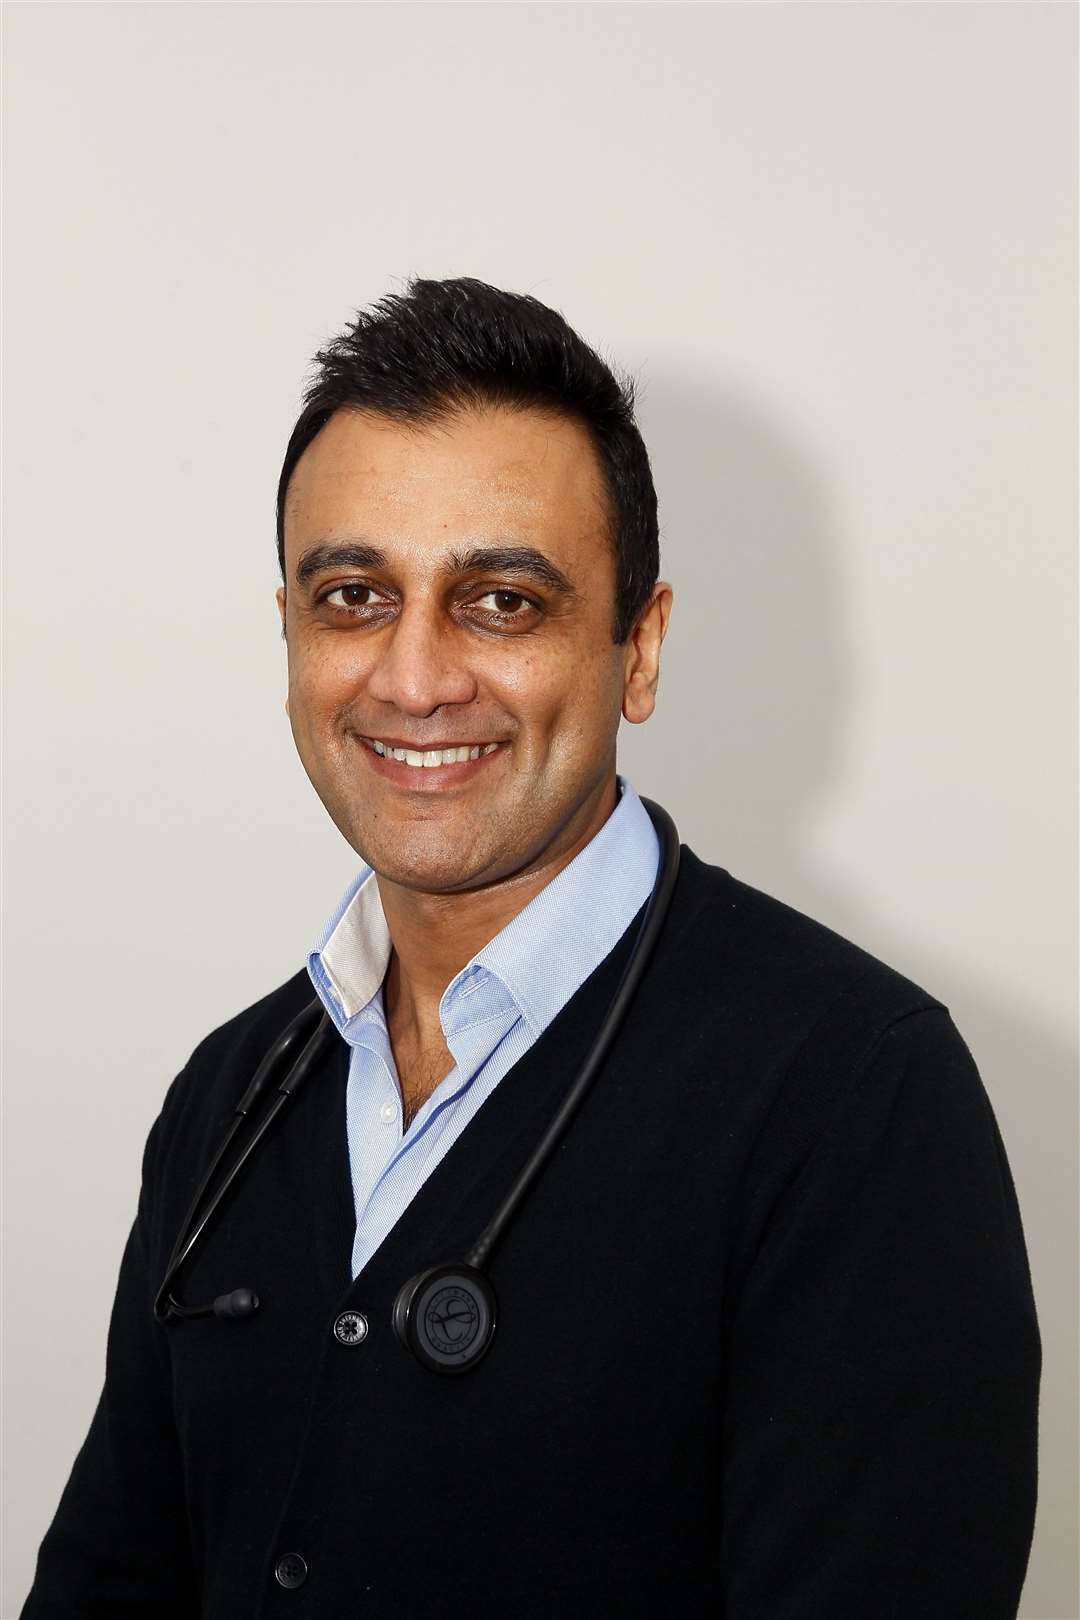 Vitality Home Health, Gravesend. pictures of Dr. Manpinder Sahota and staff members at the Health Centre.......Dr. Manpinder Sahota.....Picture: Sean Aidan. (8156317)